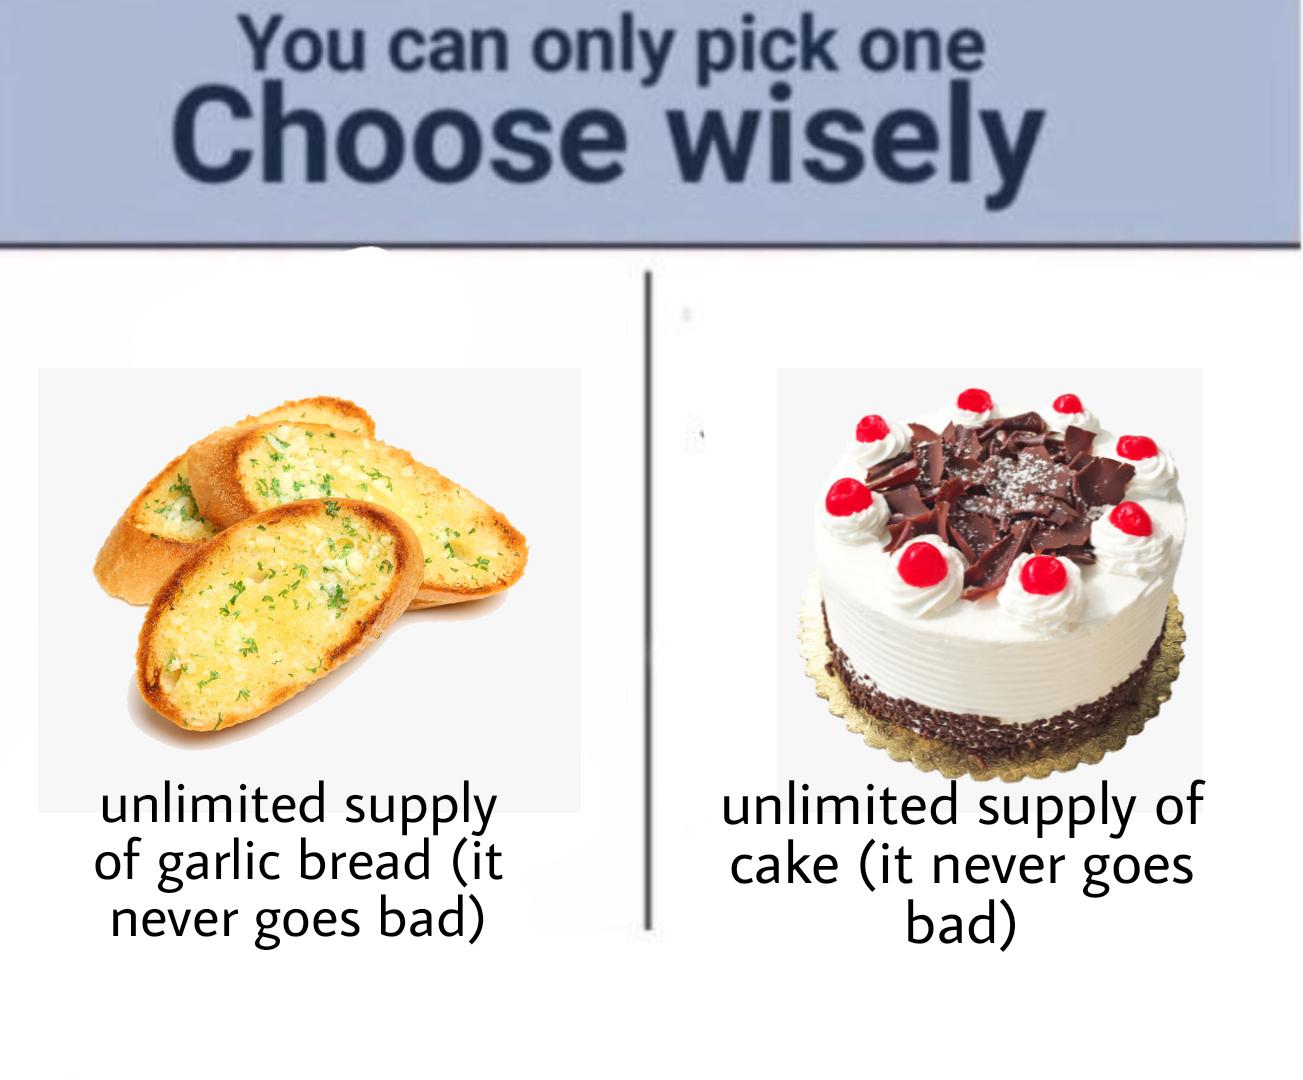 choose wisely cat girlfriend loves you meme - You can only pick one Choose wisely unlimited supply of garlic bread it never goes bad unlimited supply of cake it never goes bad